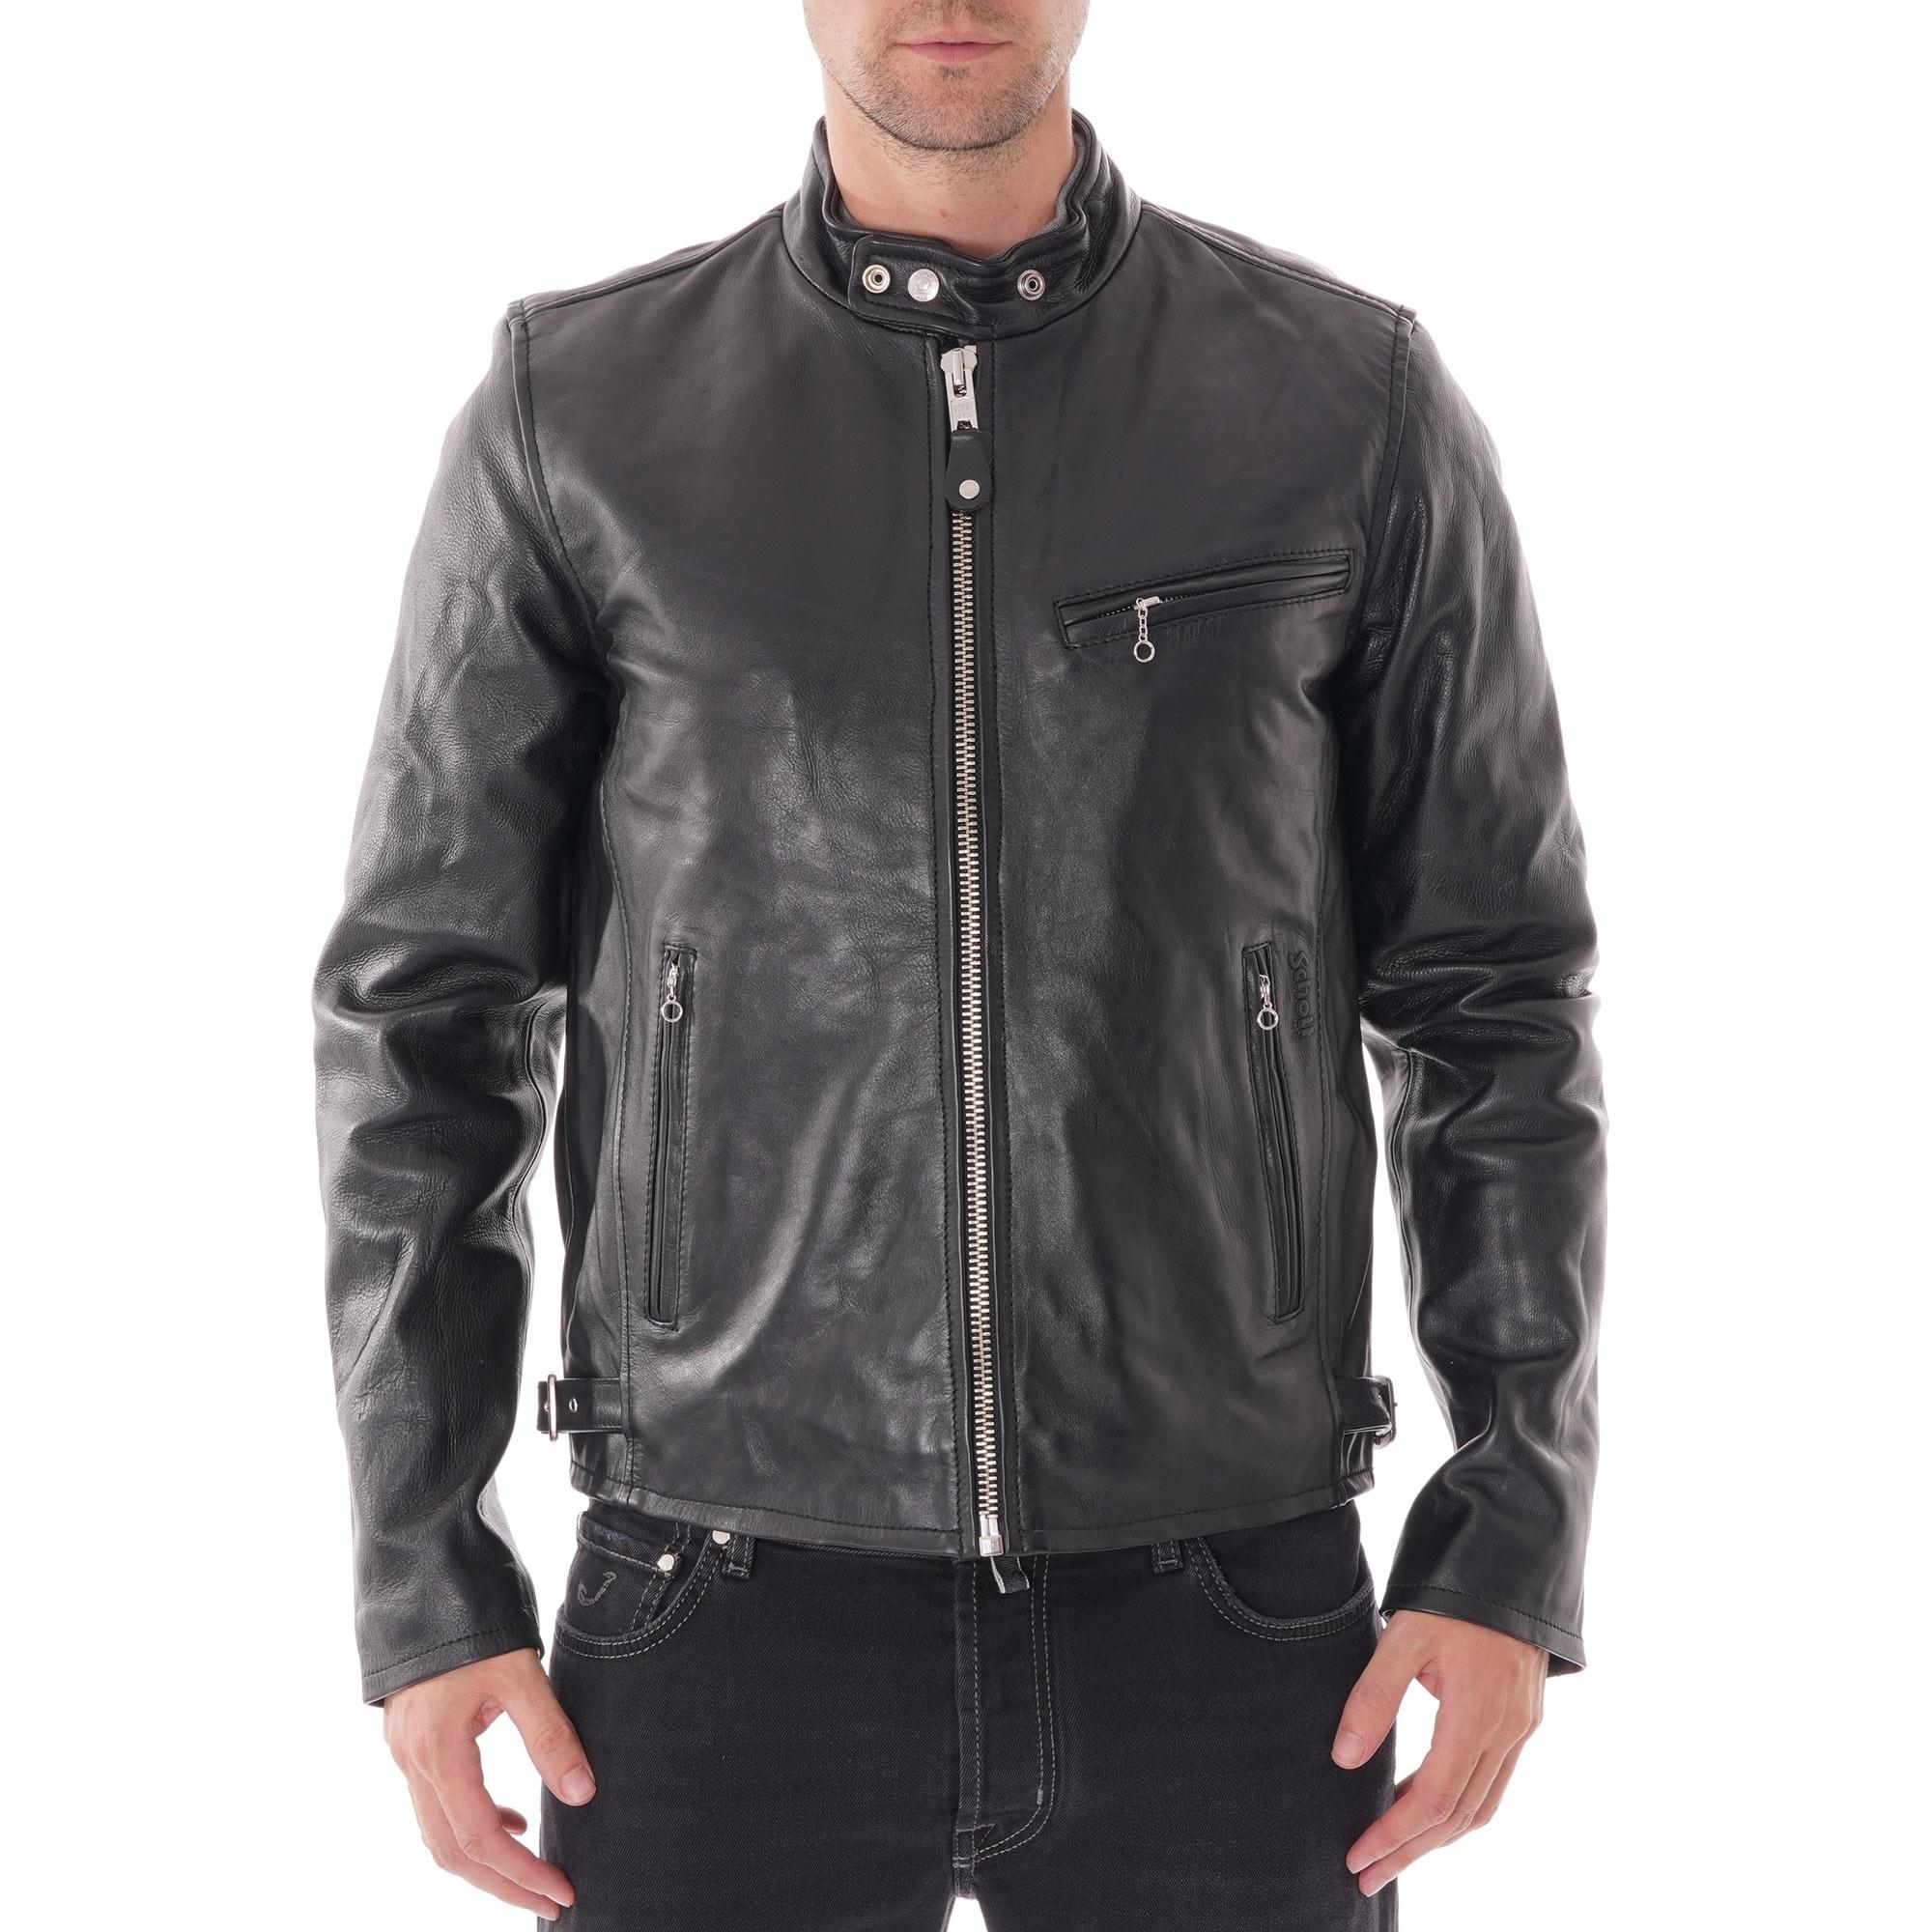 Schott Nyc Classic Racer Black Leather Jacket Lc940d for Men - Lyst